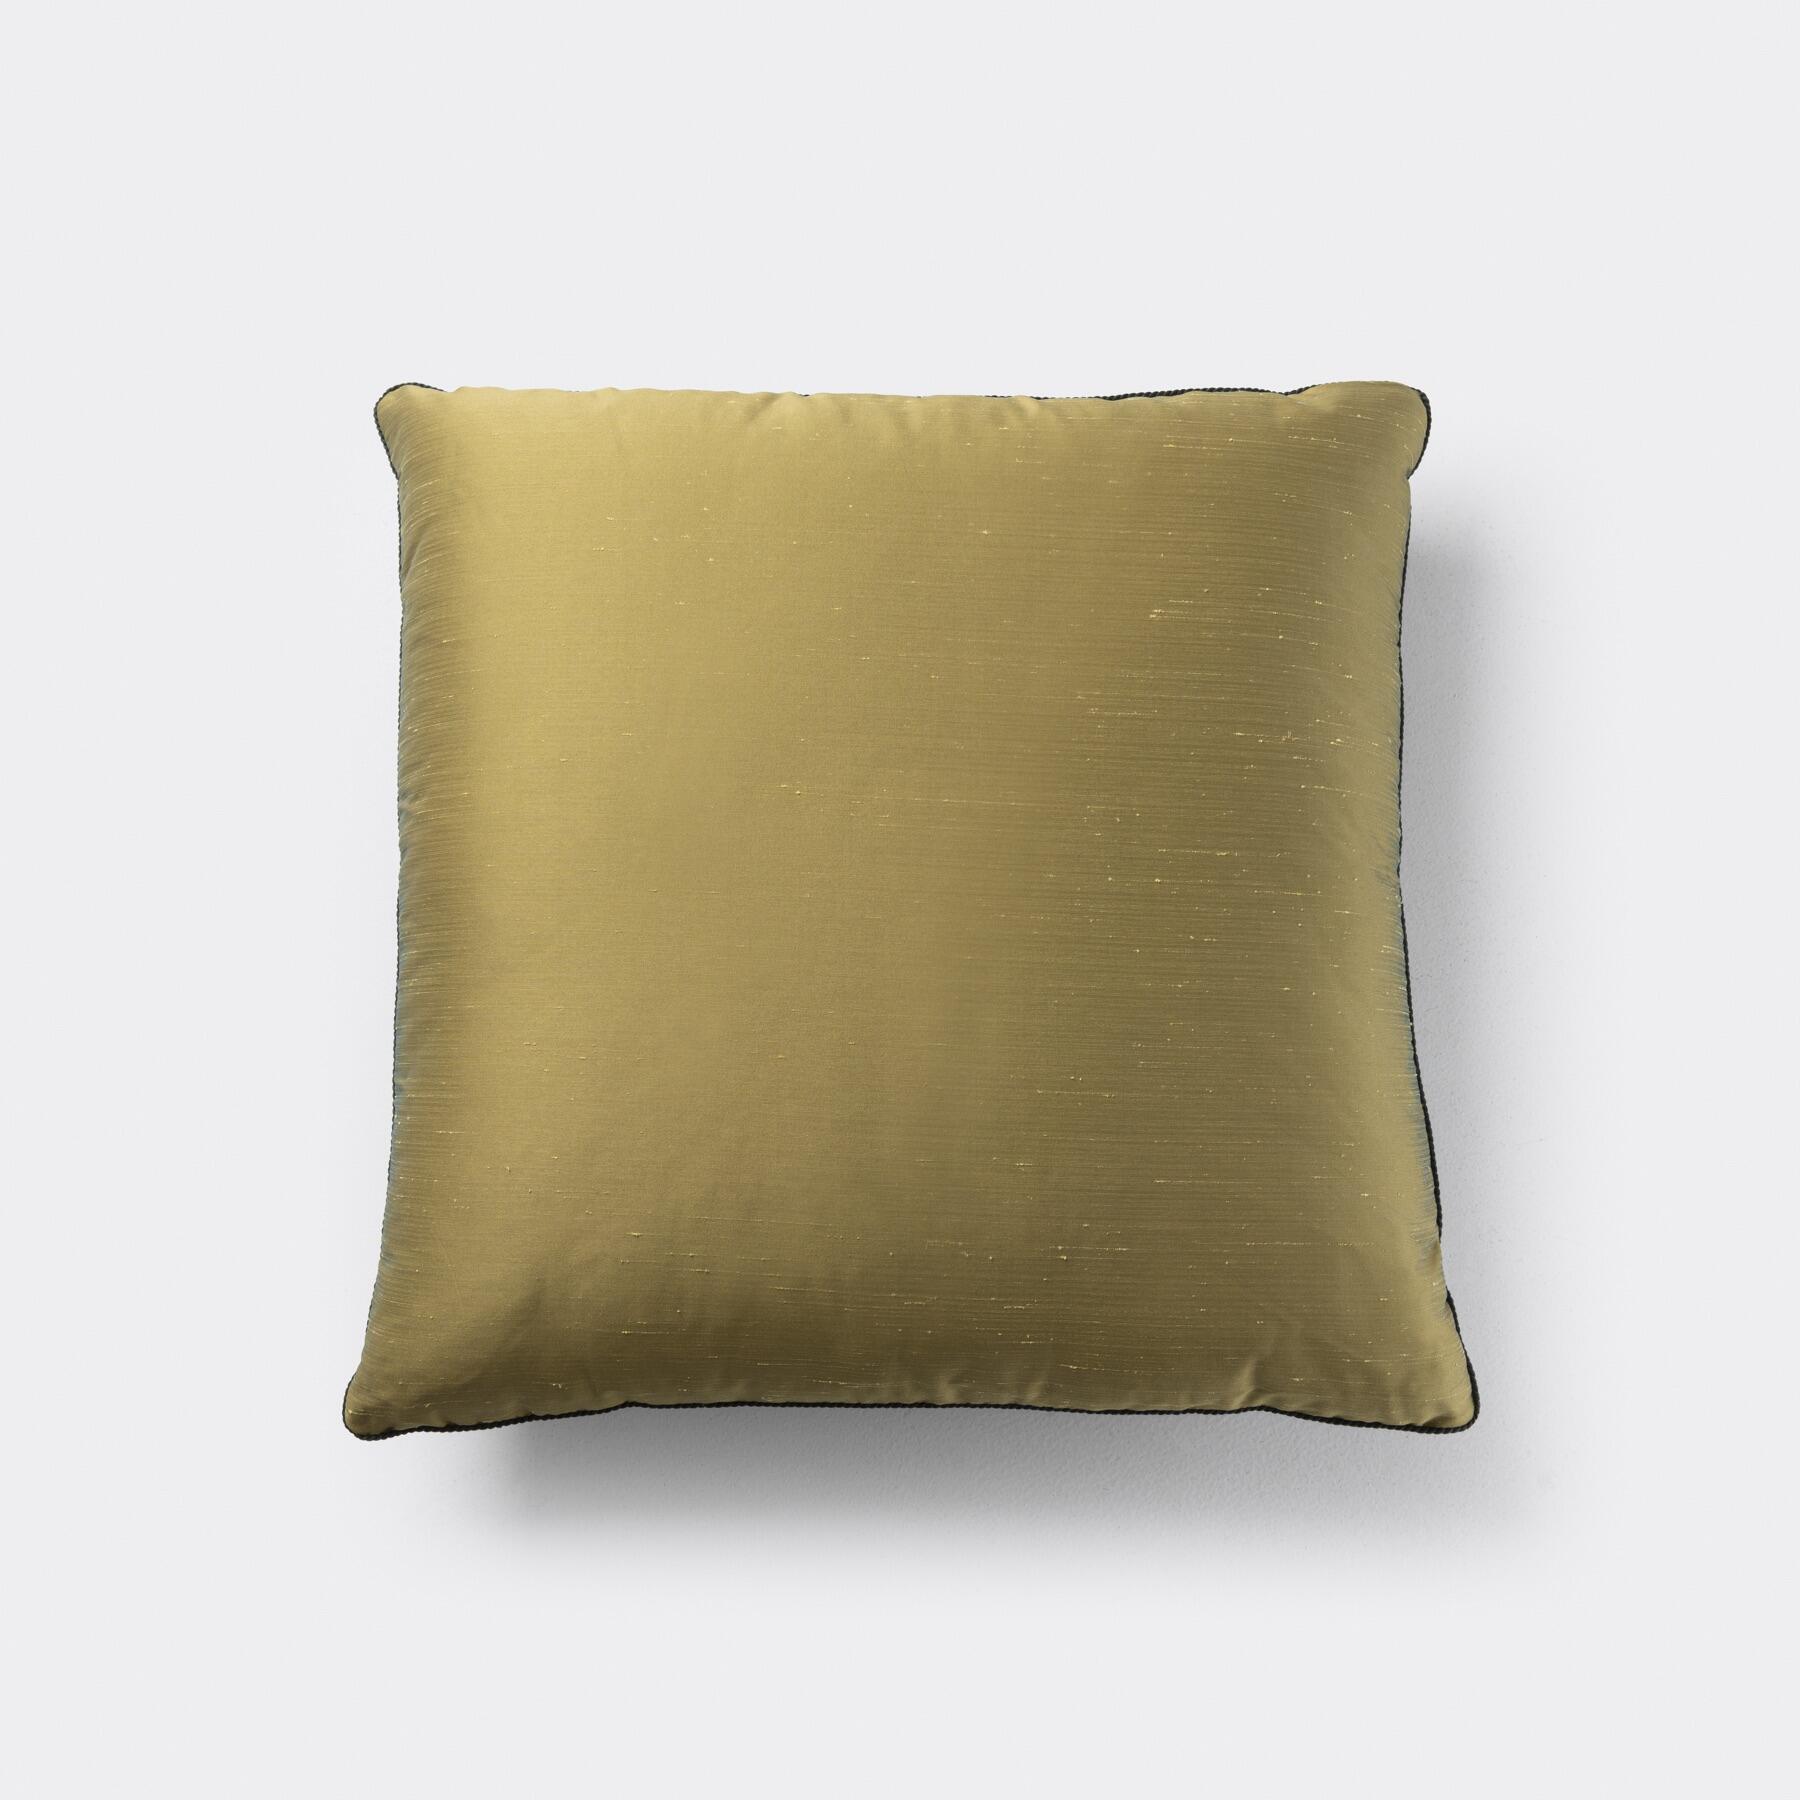 Throw Pillow, 22 x 22 in, Andrea: Chartreuse